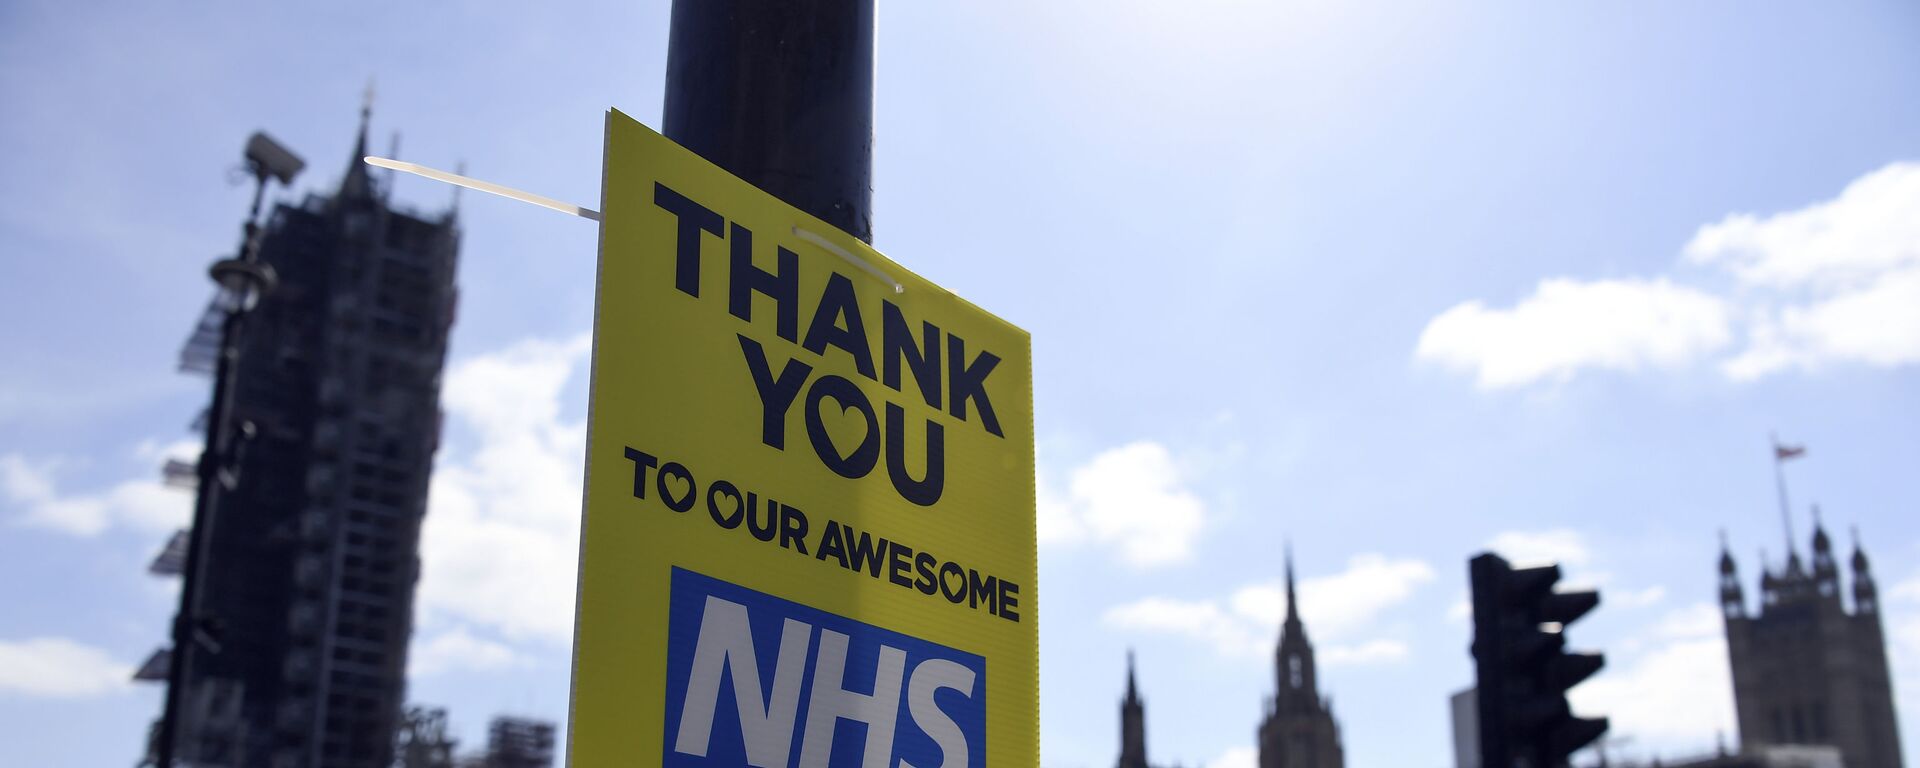 A message in support to the NHS is seen in Westminster, during to the Coronavirus outbreak, in London, Tuesday, April 14, 2020 - Sputnik International, 1920, 10.02.2021